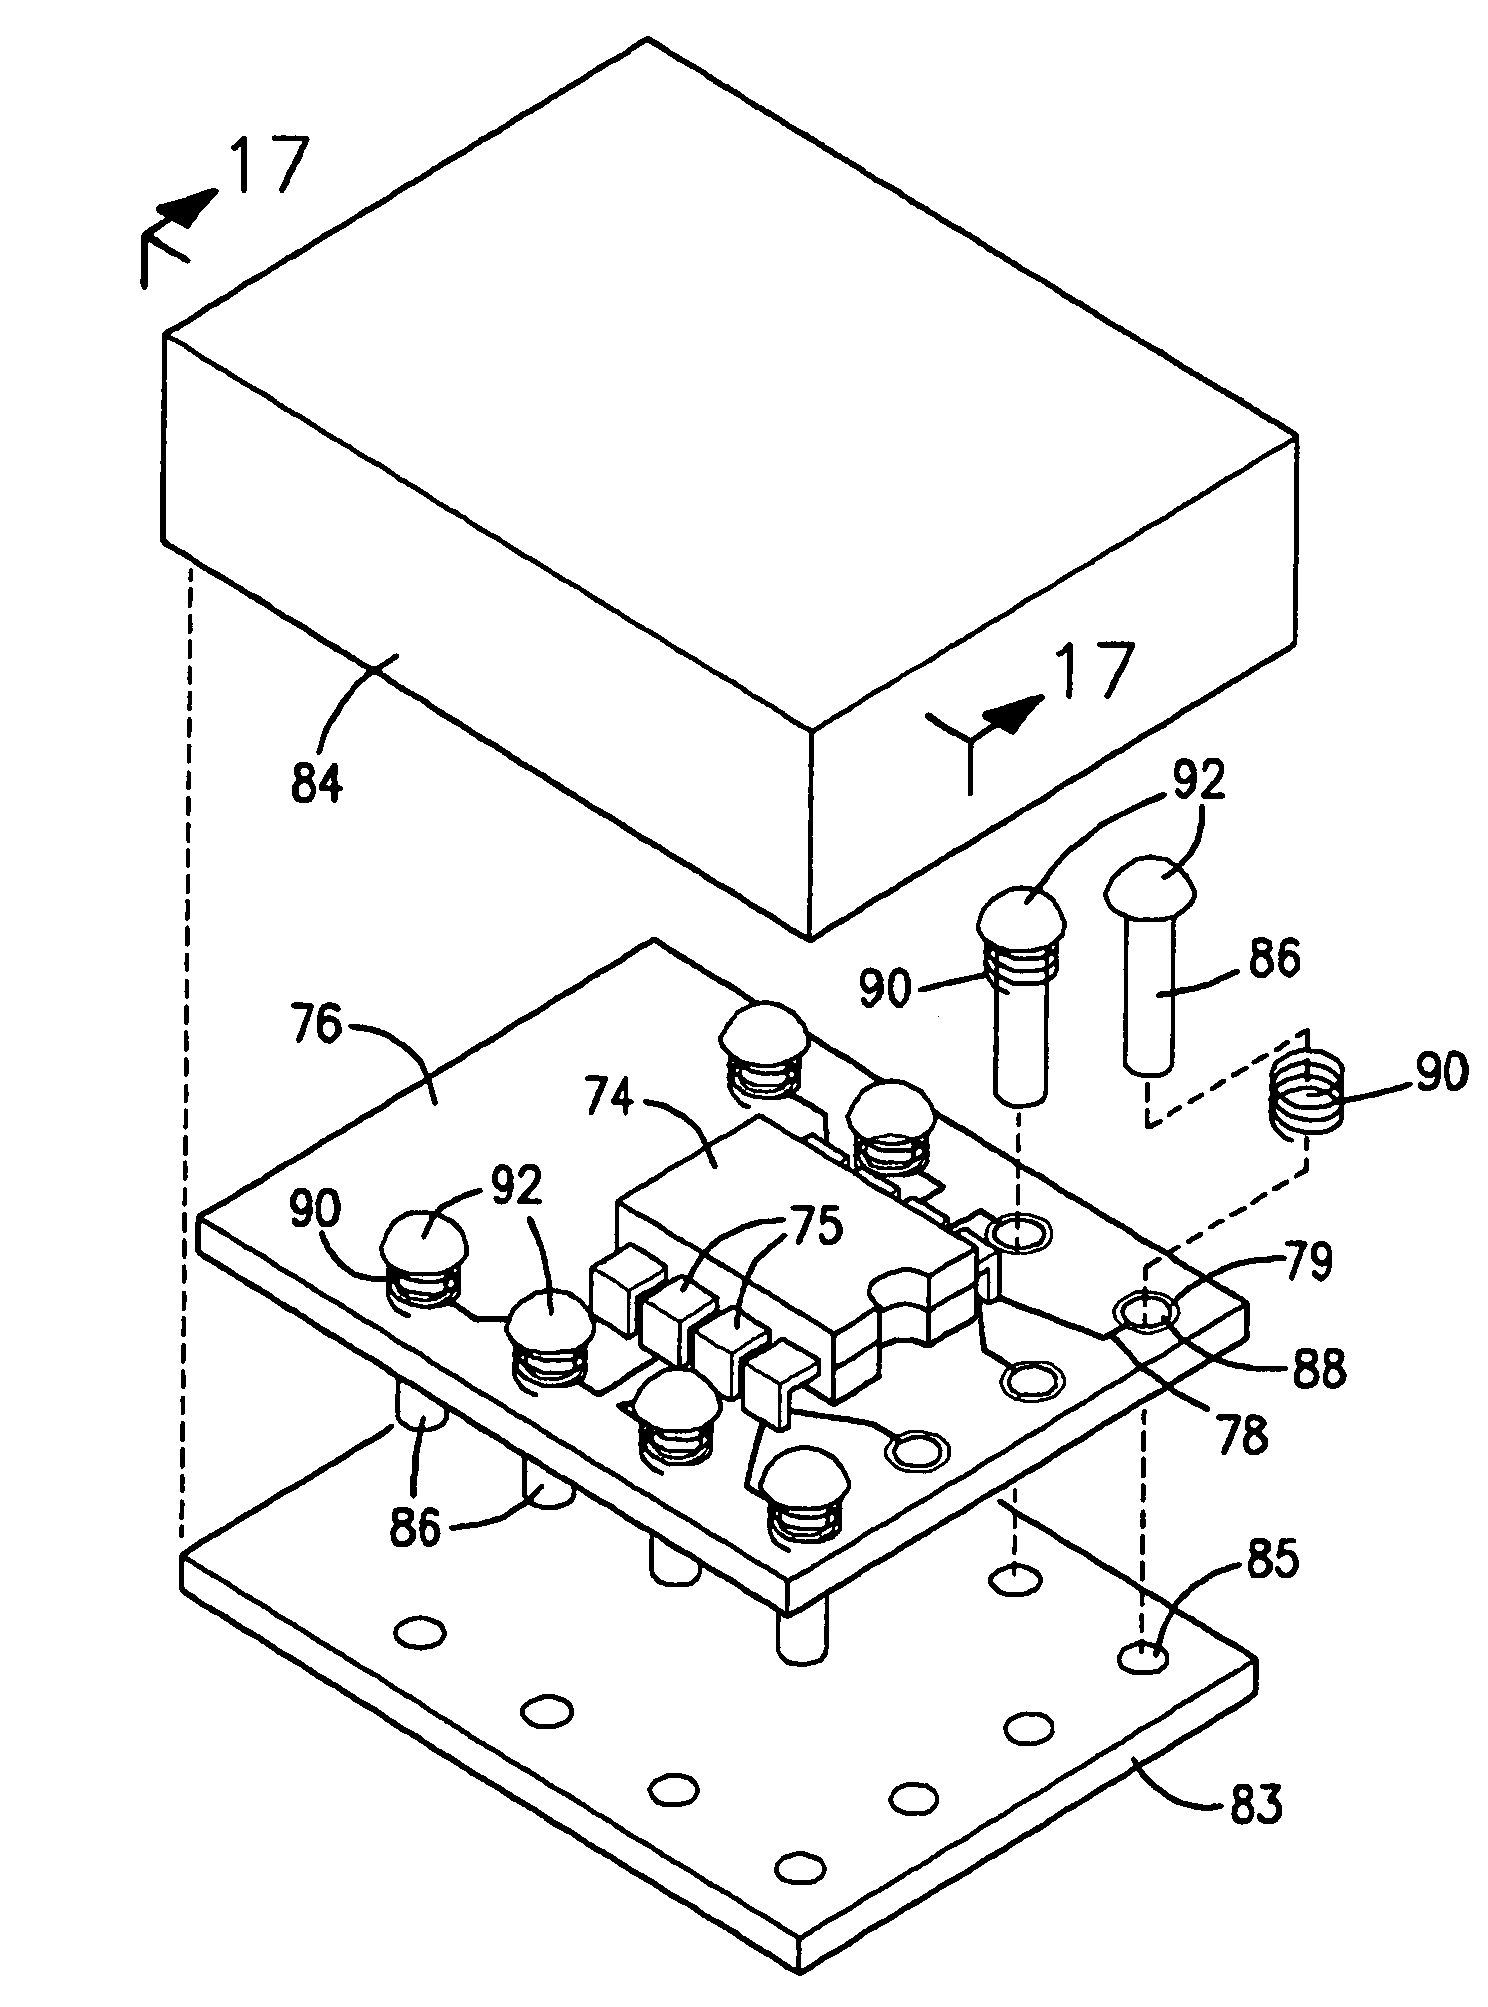 Magnetic component connector, circuit boards for use therewith, and kits for building and designing circuits